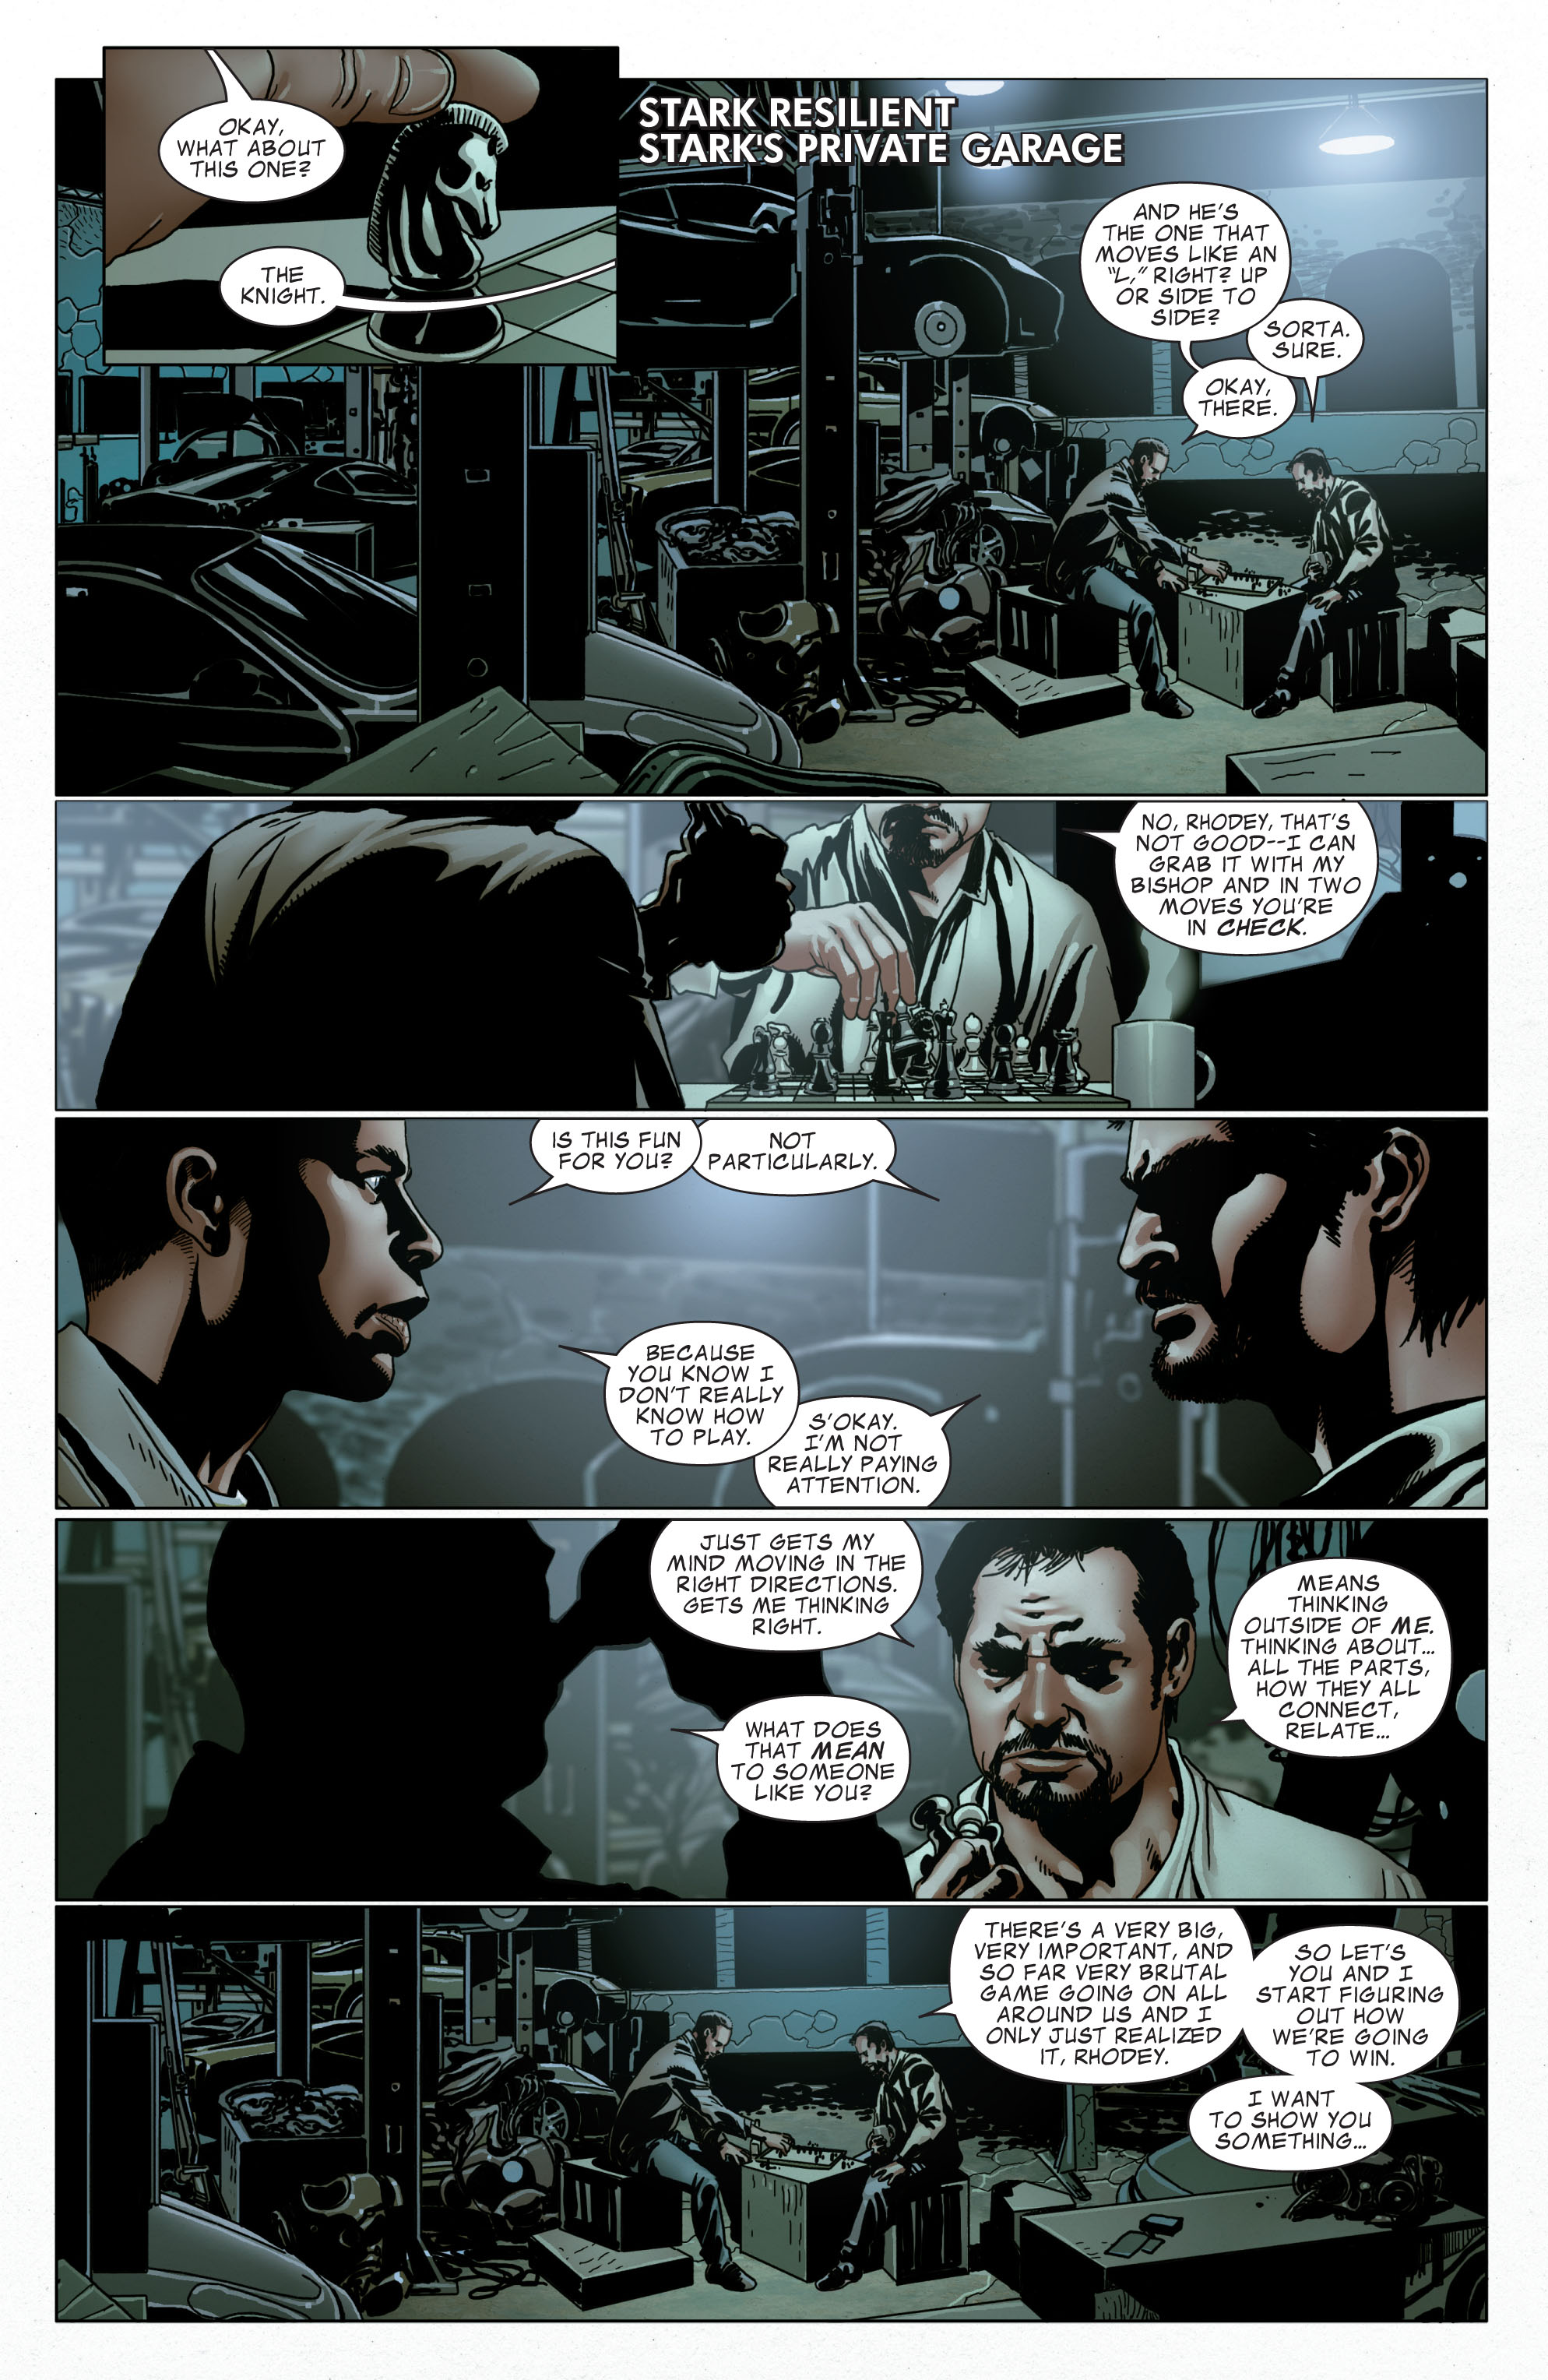 Invincible Iron Man (2008) 514 Page 8